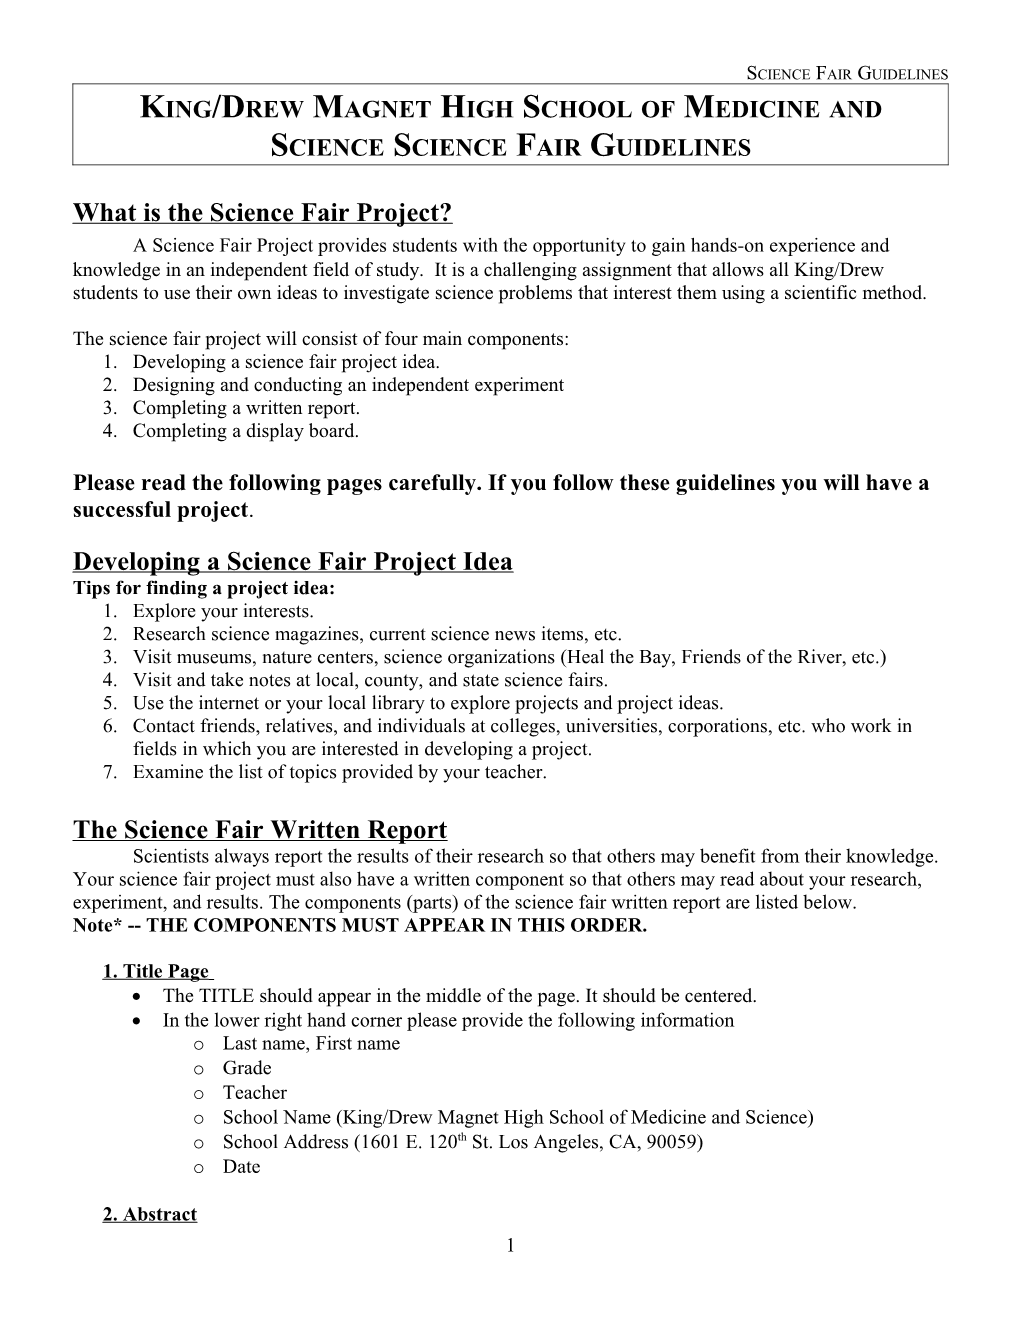 King/Drew Magnet High School of Medicine and Science Science Fair Guidelines